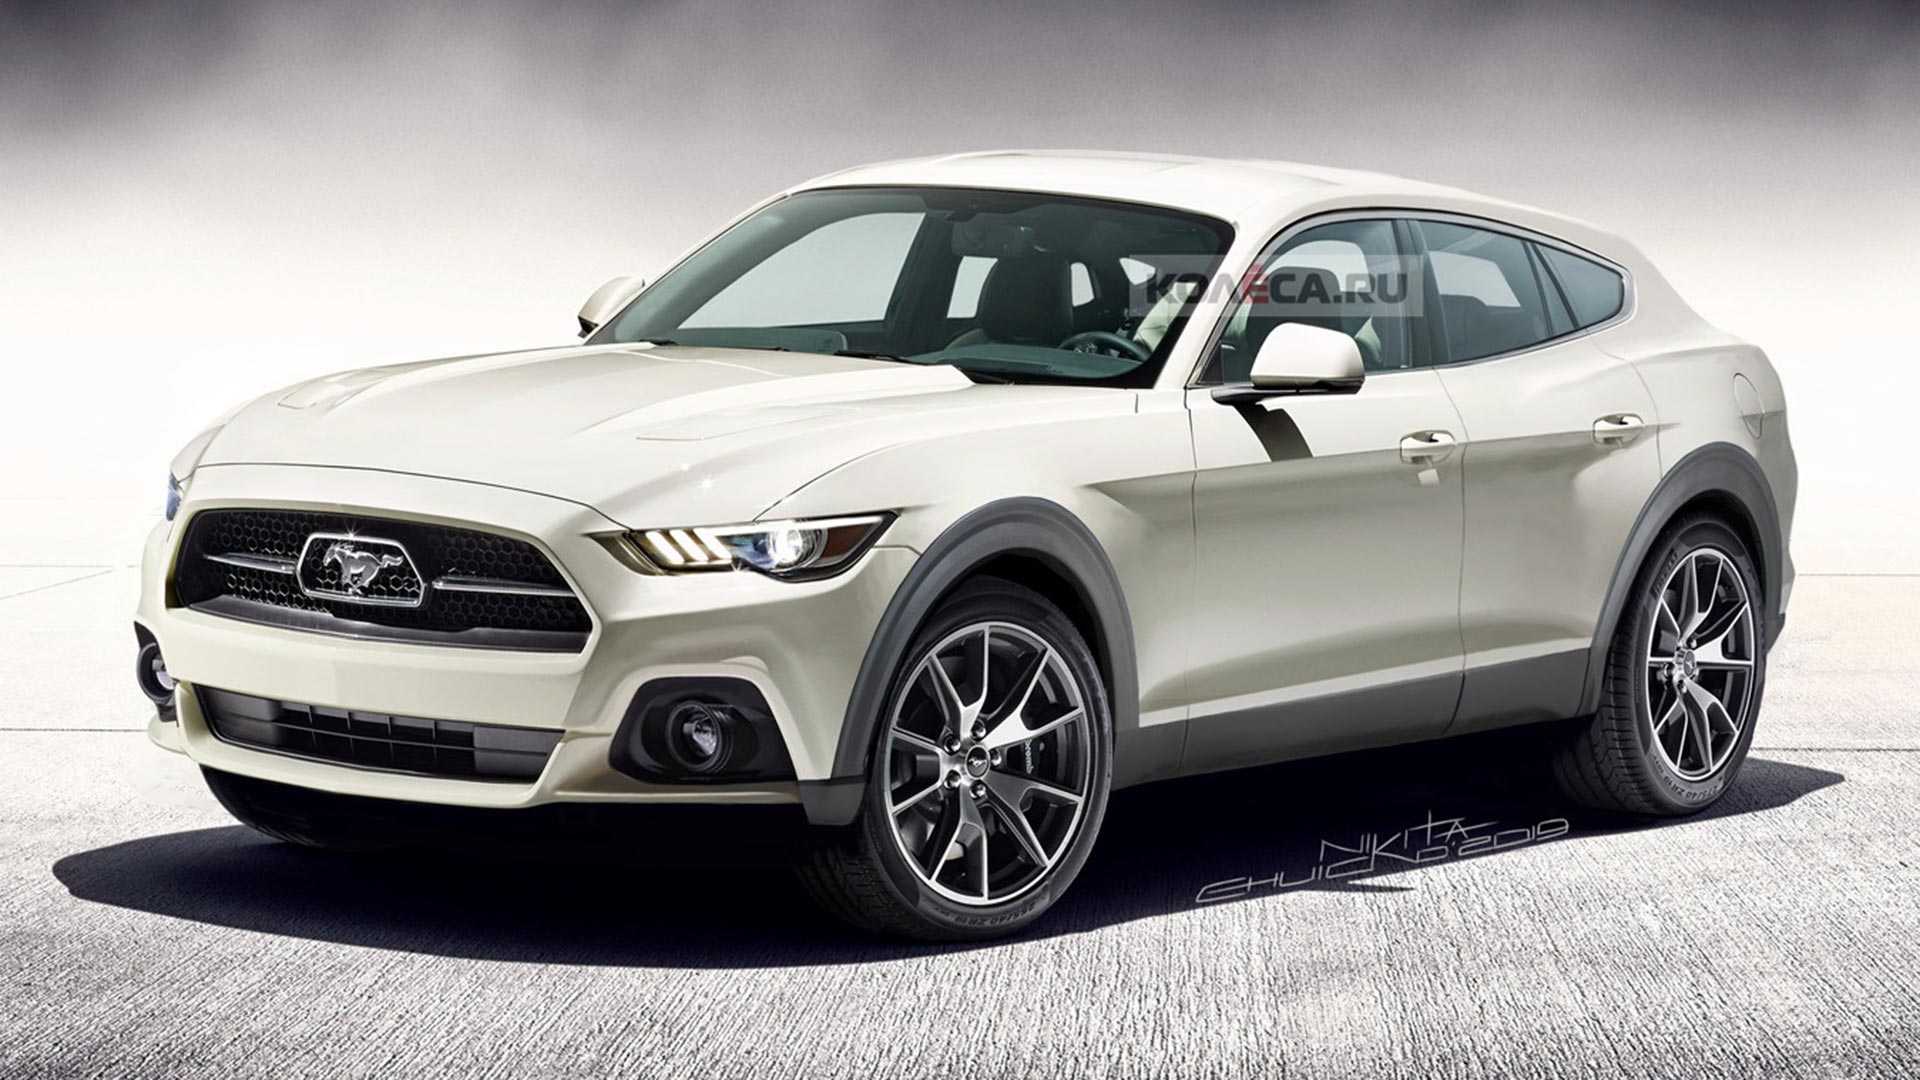 Ford Mustang Inspired SUV Rendered As Rugged Wagon